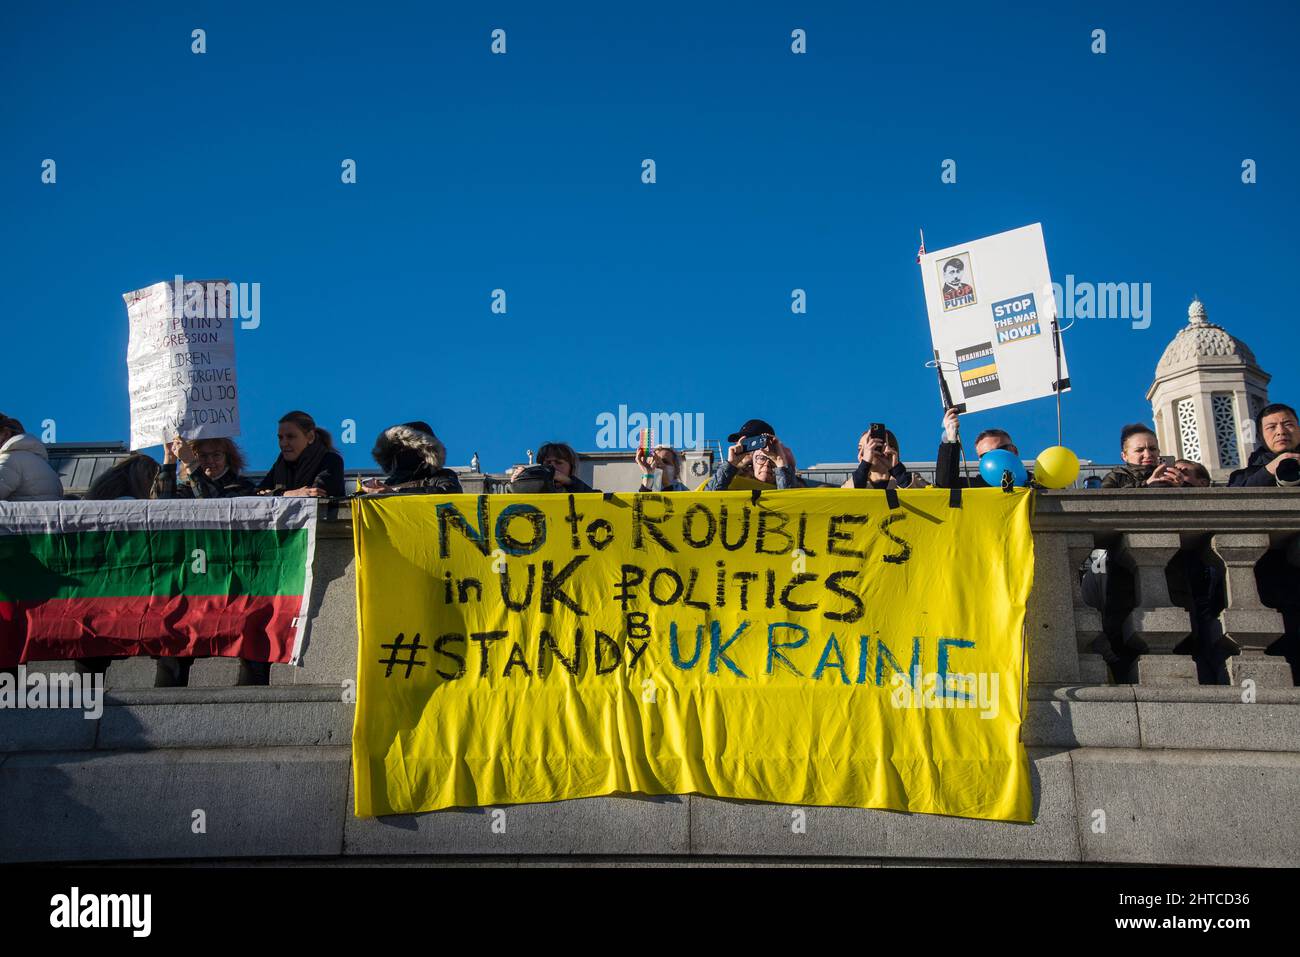 No to the rouble in UK politics banner, Stand by Ukraine, Trafalgar Square, London, UK Stock Photo